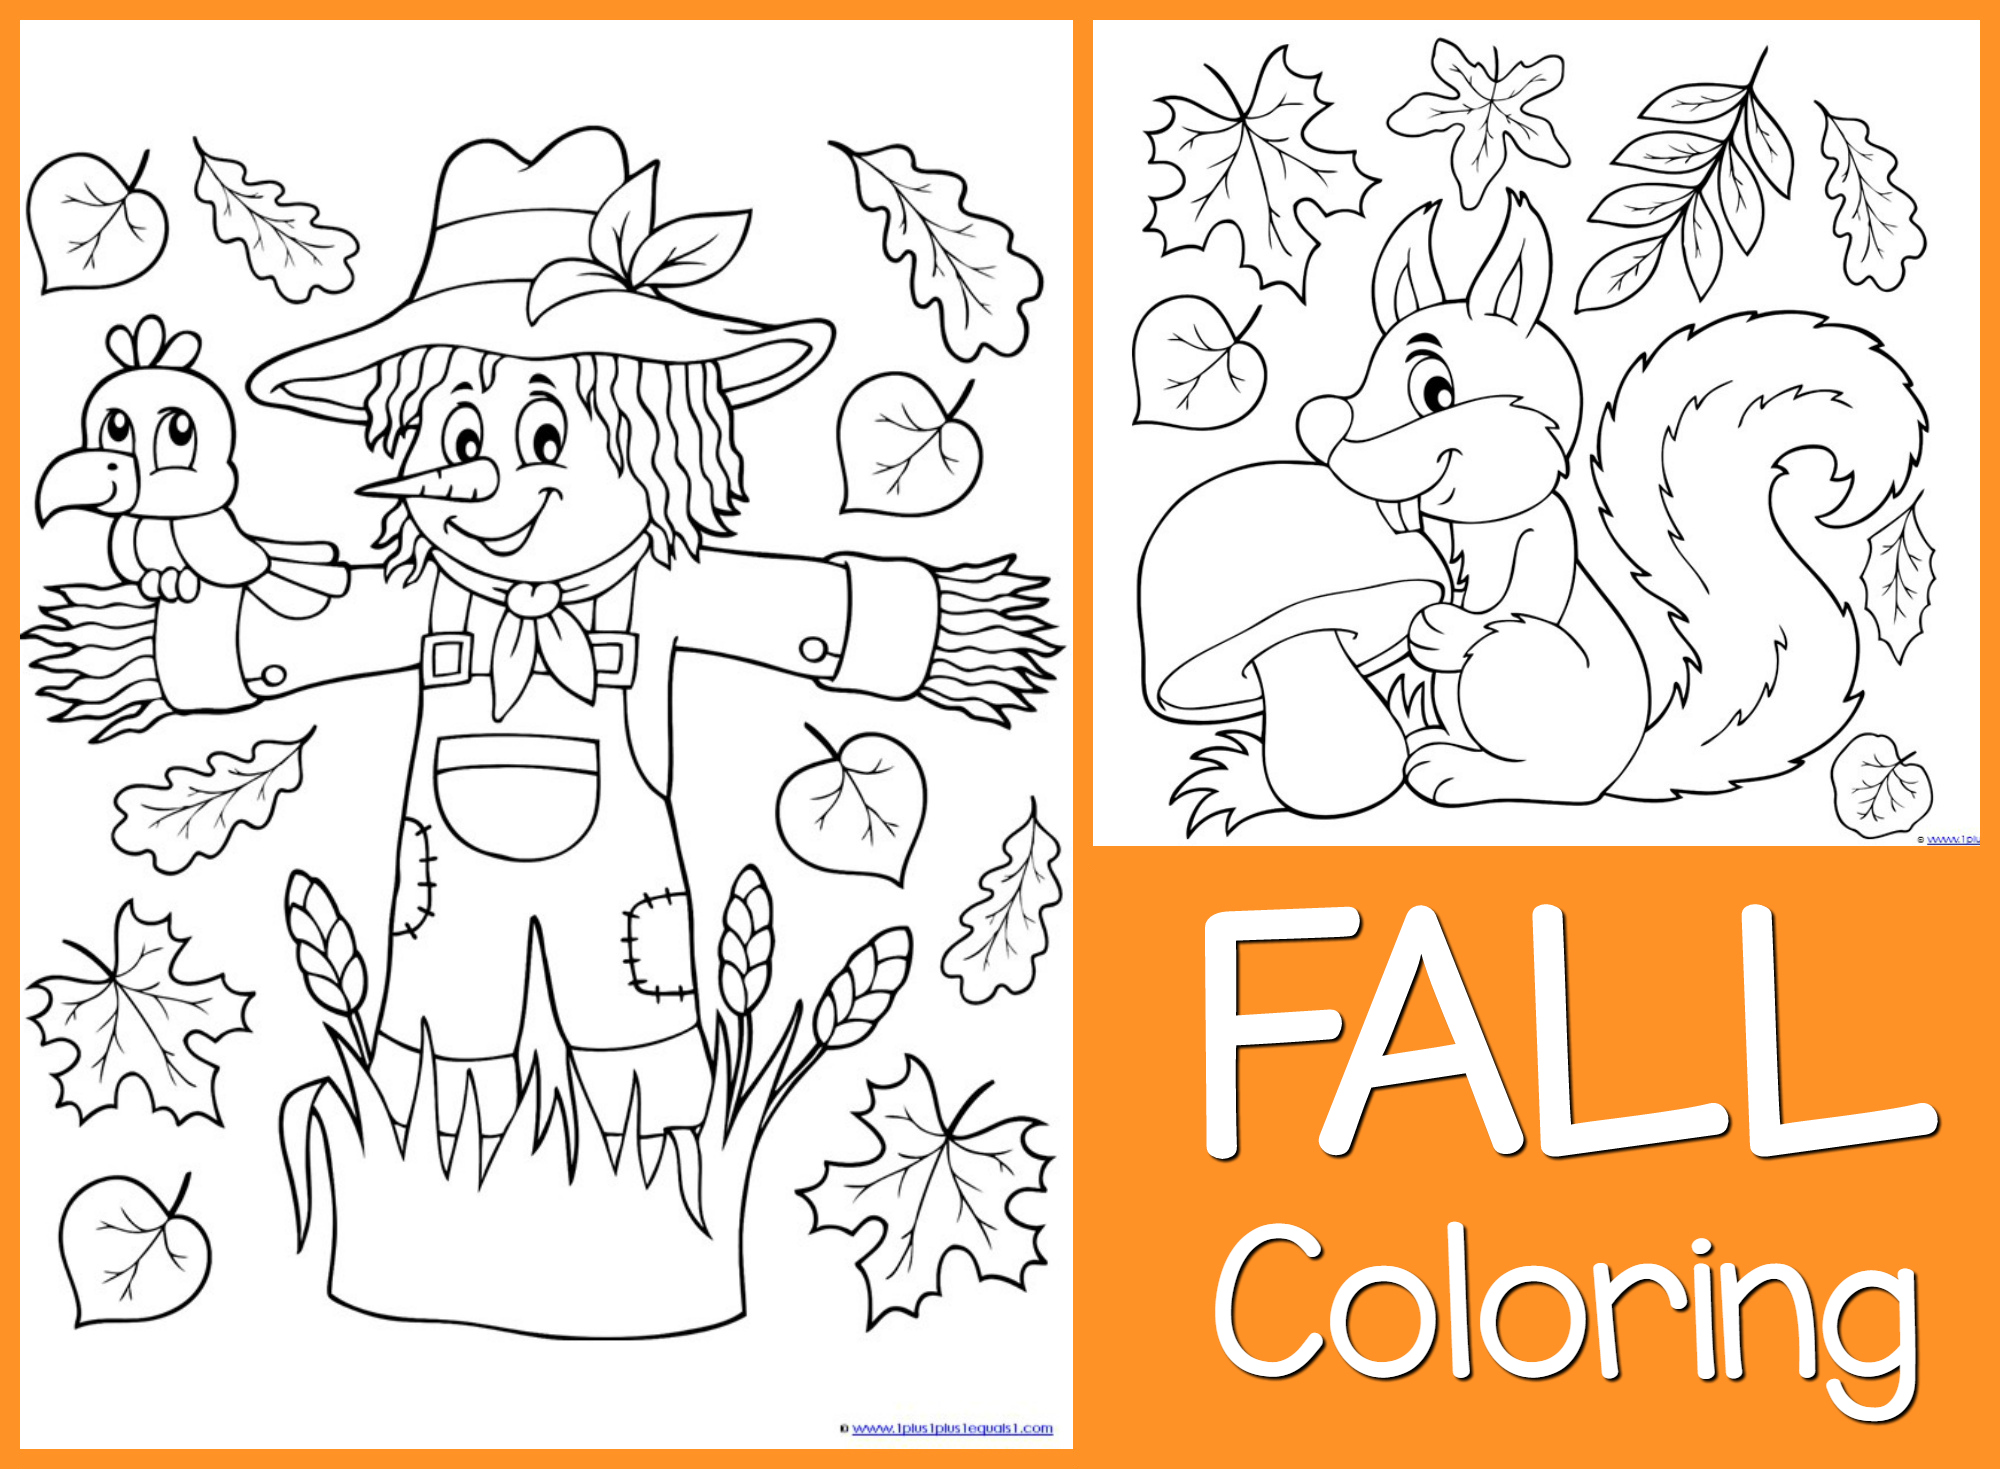 Coloring Pages For Kids Fall - We’ve brought you some fall coloring